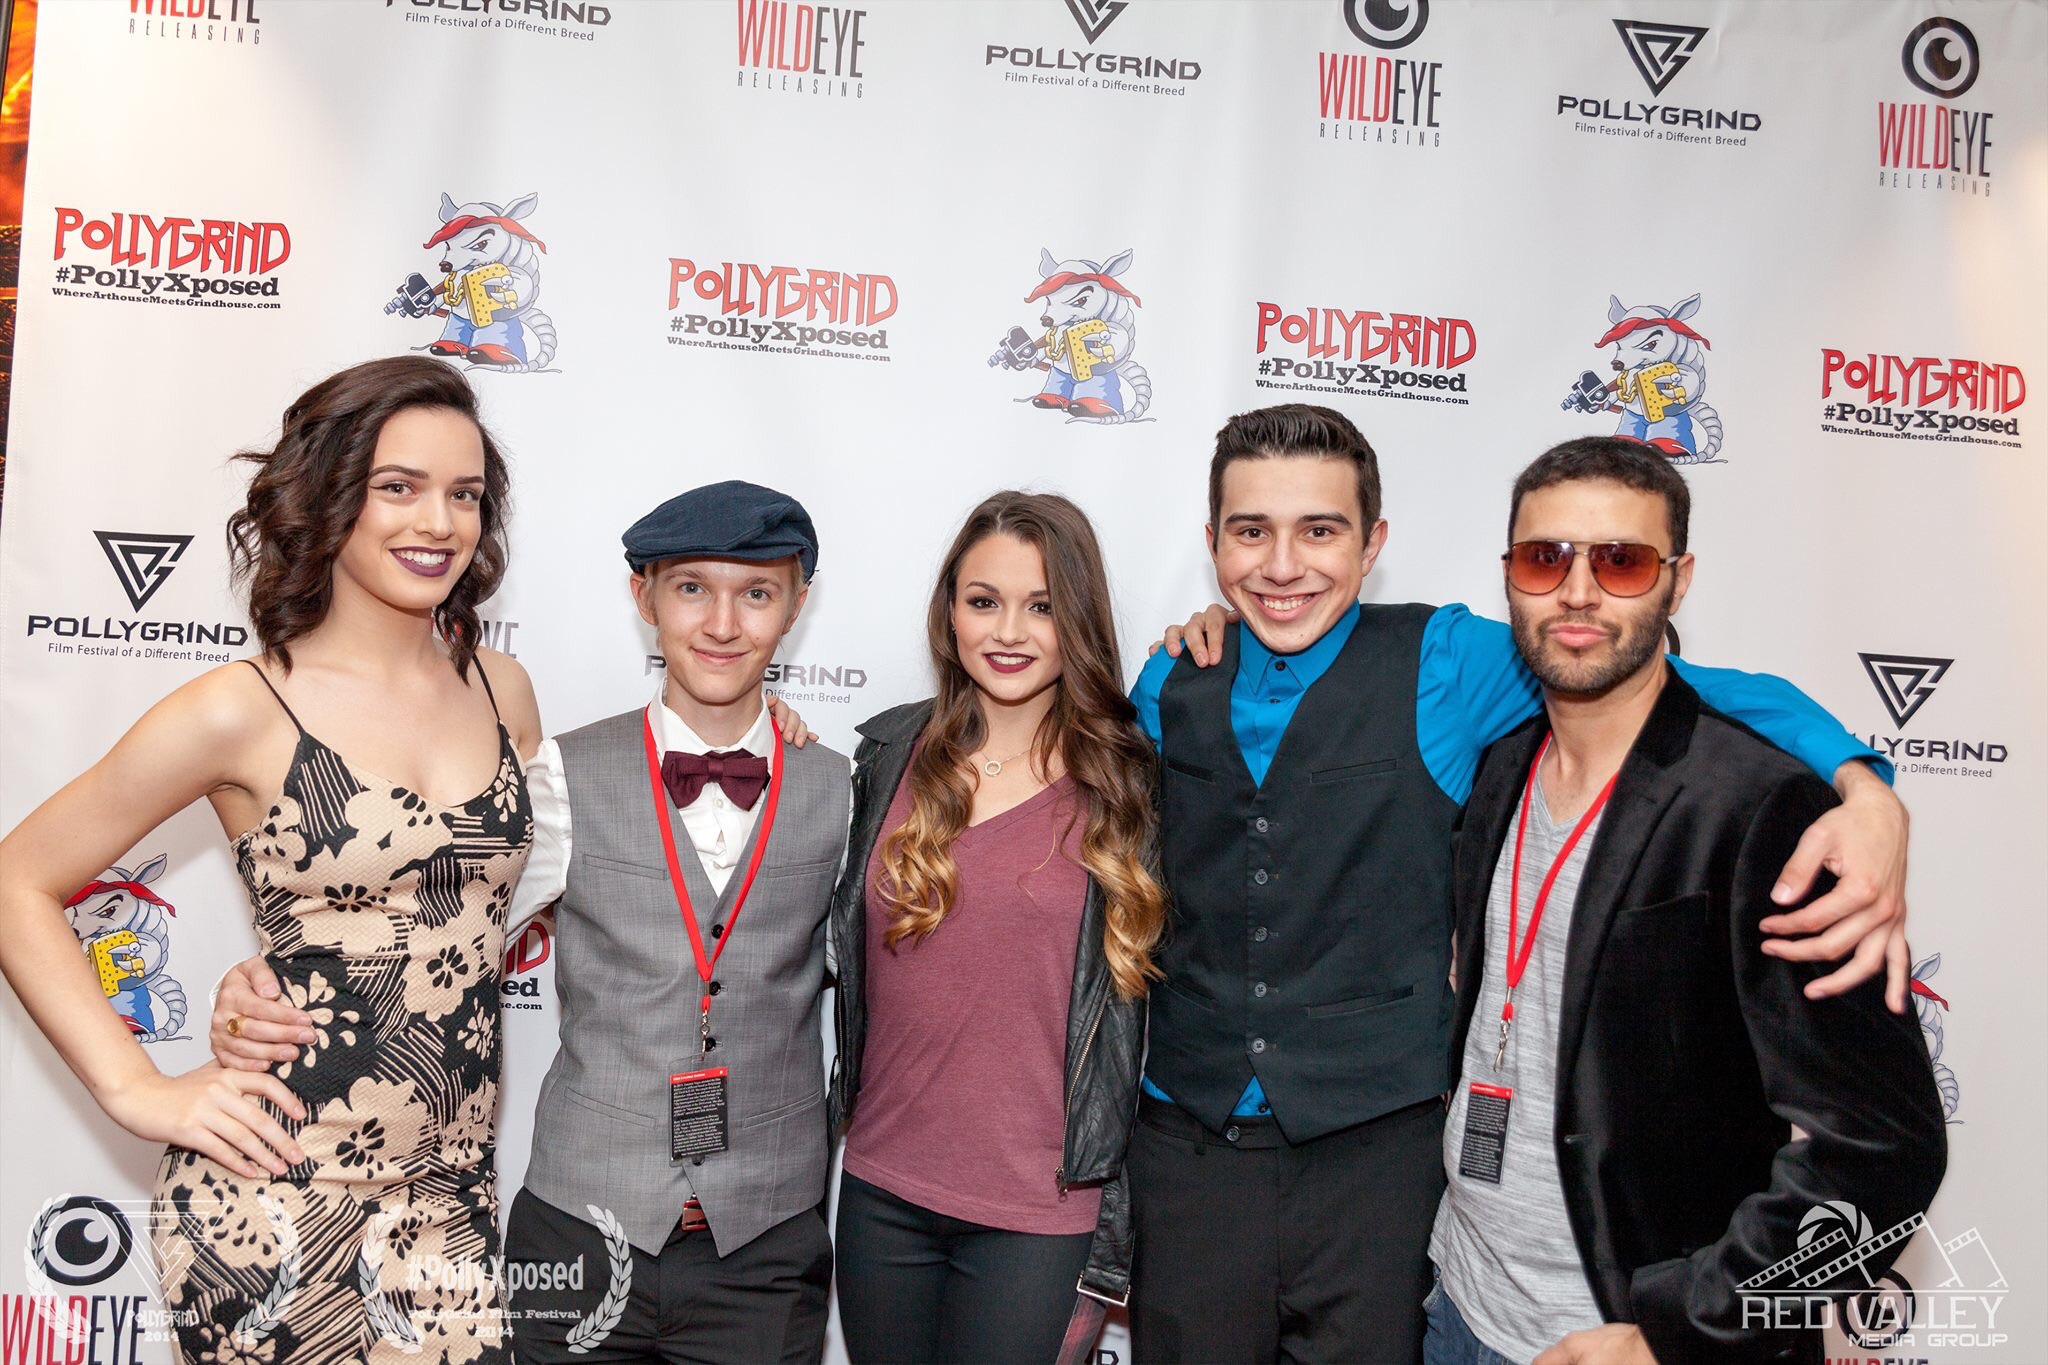 Joey Bell at the world premiere of HEIDI at the Galaxy Theaters in Green Valley as part of the Pollygrind Film Festival. Pictured Eva Falanna, Joey Bell, Joei Fulco, Samuel Brian, and Daniel Ray. The four leads of the movie and the filmmaker